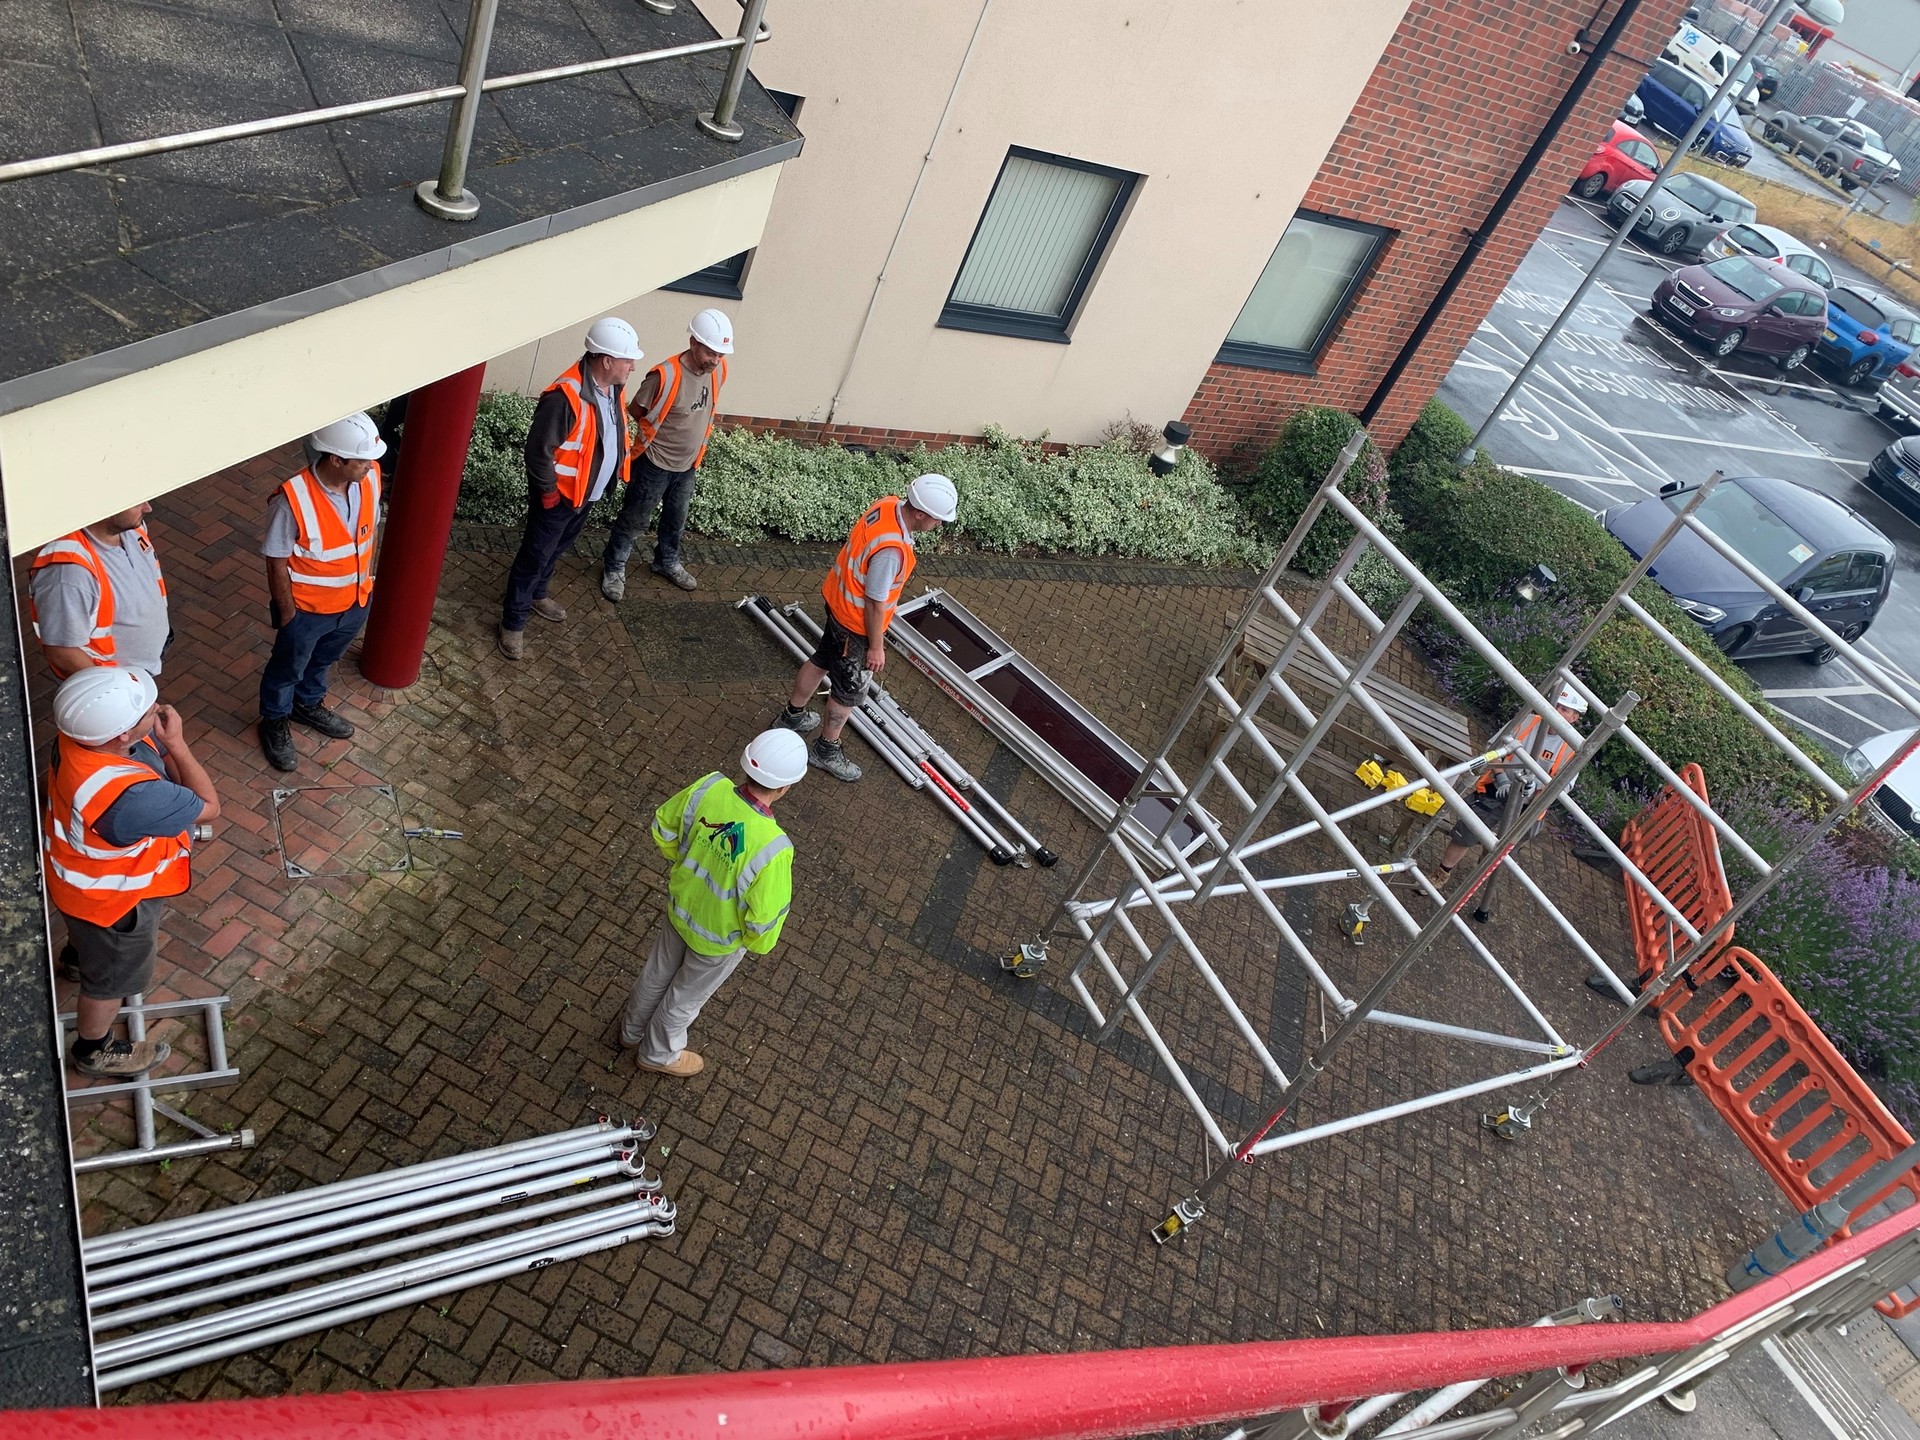 Image caption: Recent staff training at Melhuish & Saunders HQ with The Building Safety Group, covering Mobile Scaffold Tower courses – the 3T method (Through the Trap) and AGR method (Advanced Guard Rail)